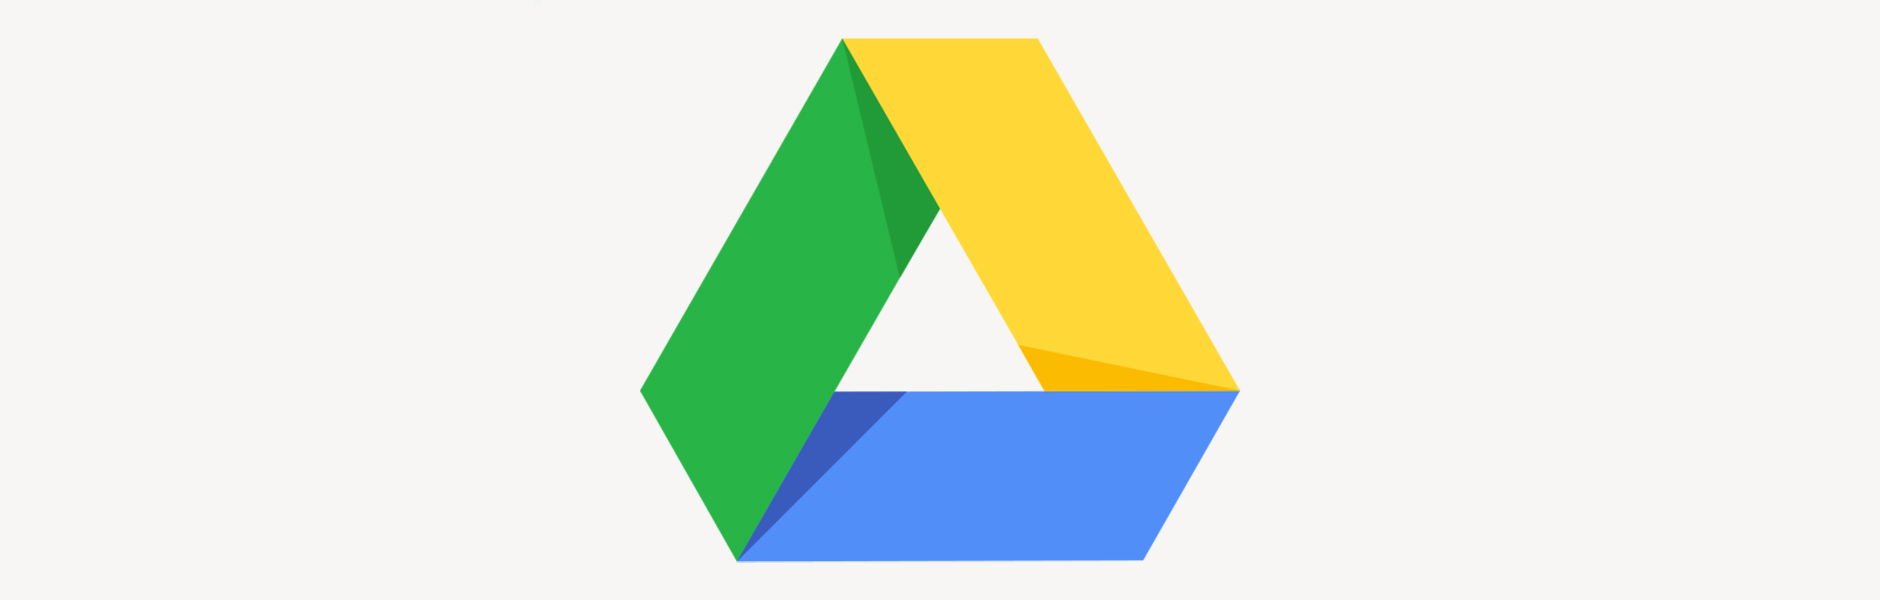 What is Google Drive?